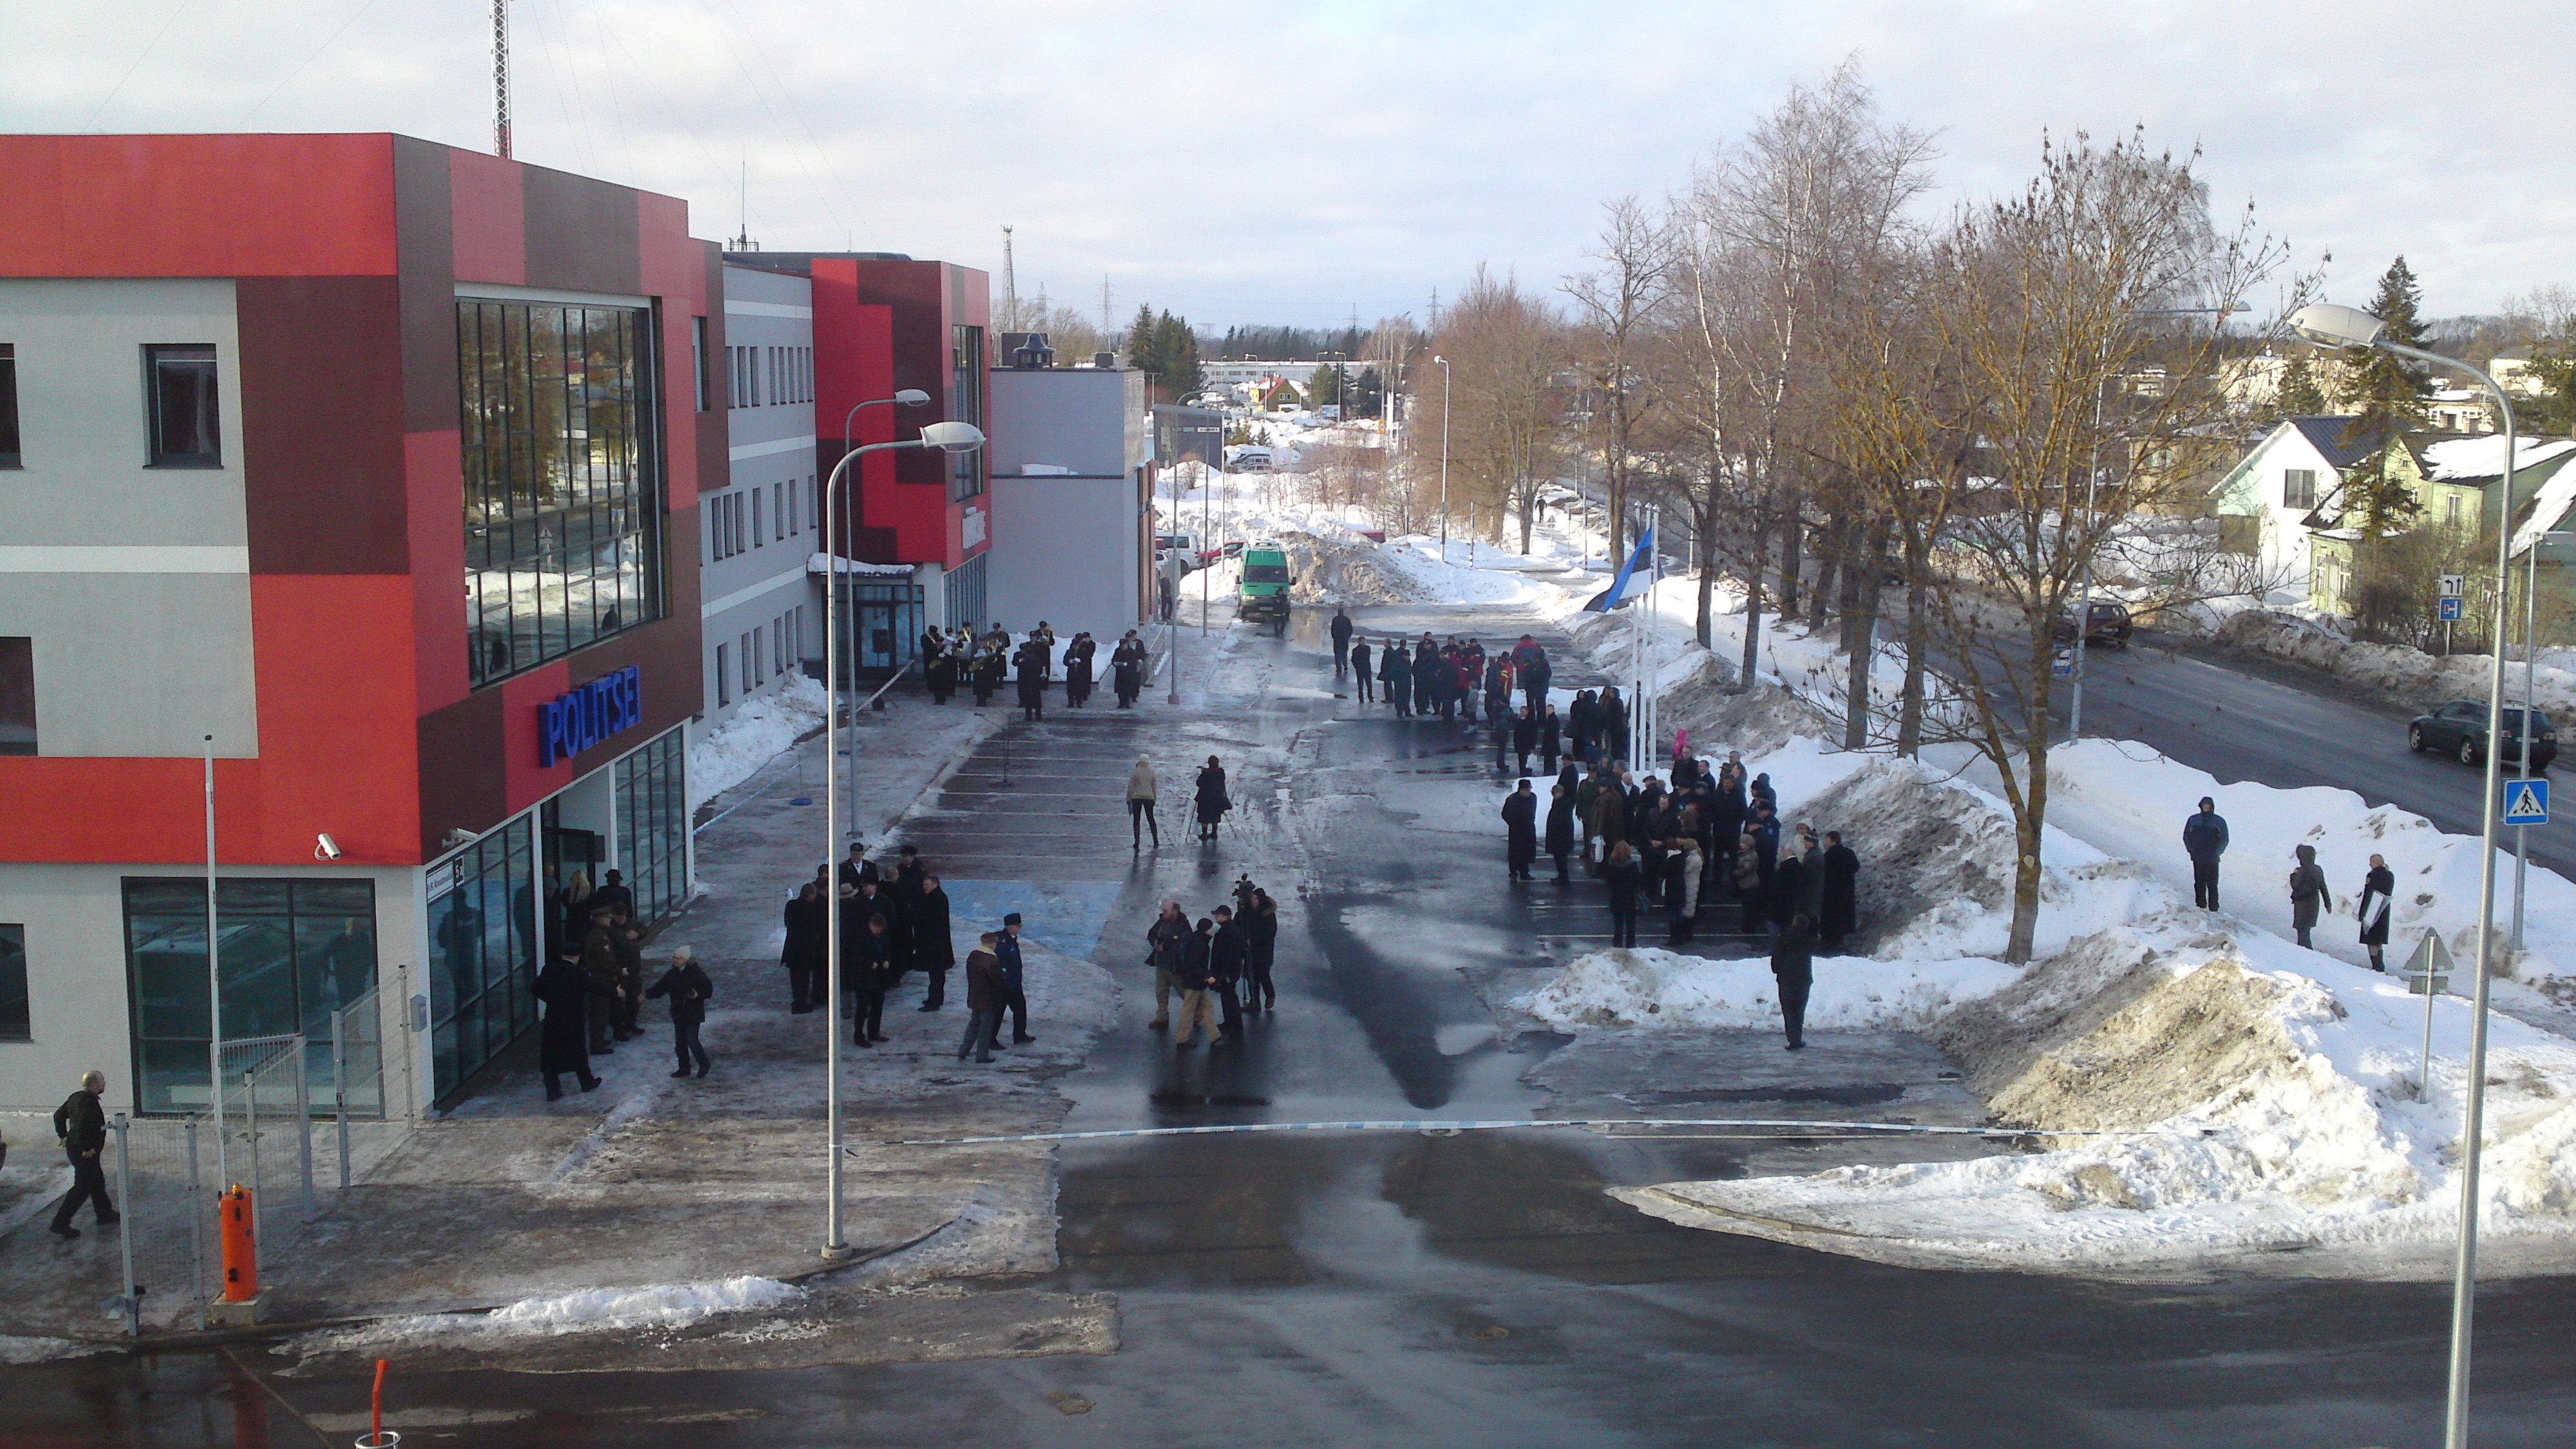 Opening of Rakvere Police House